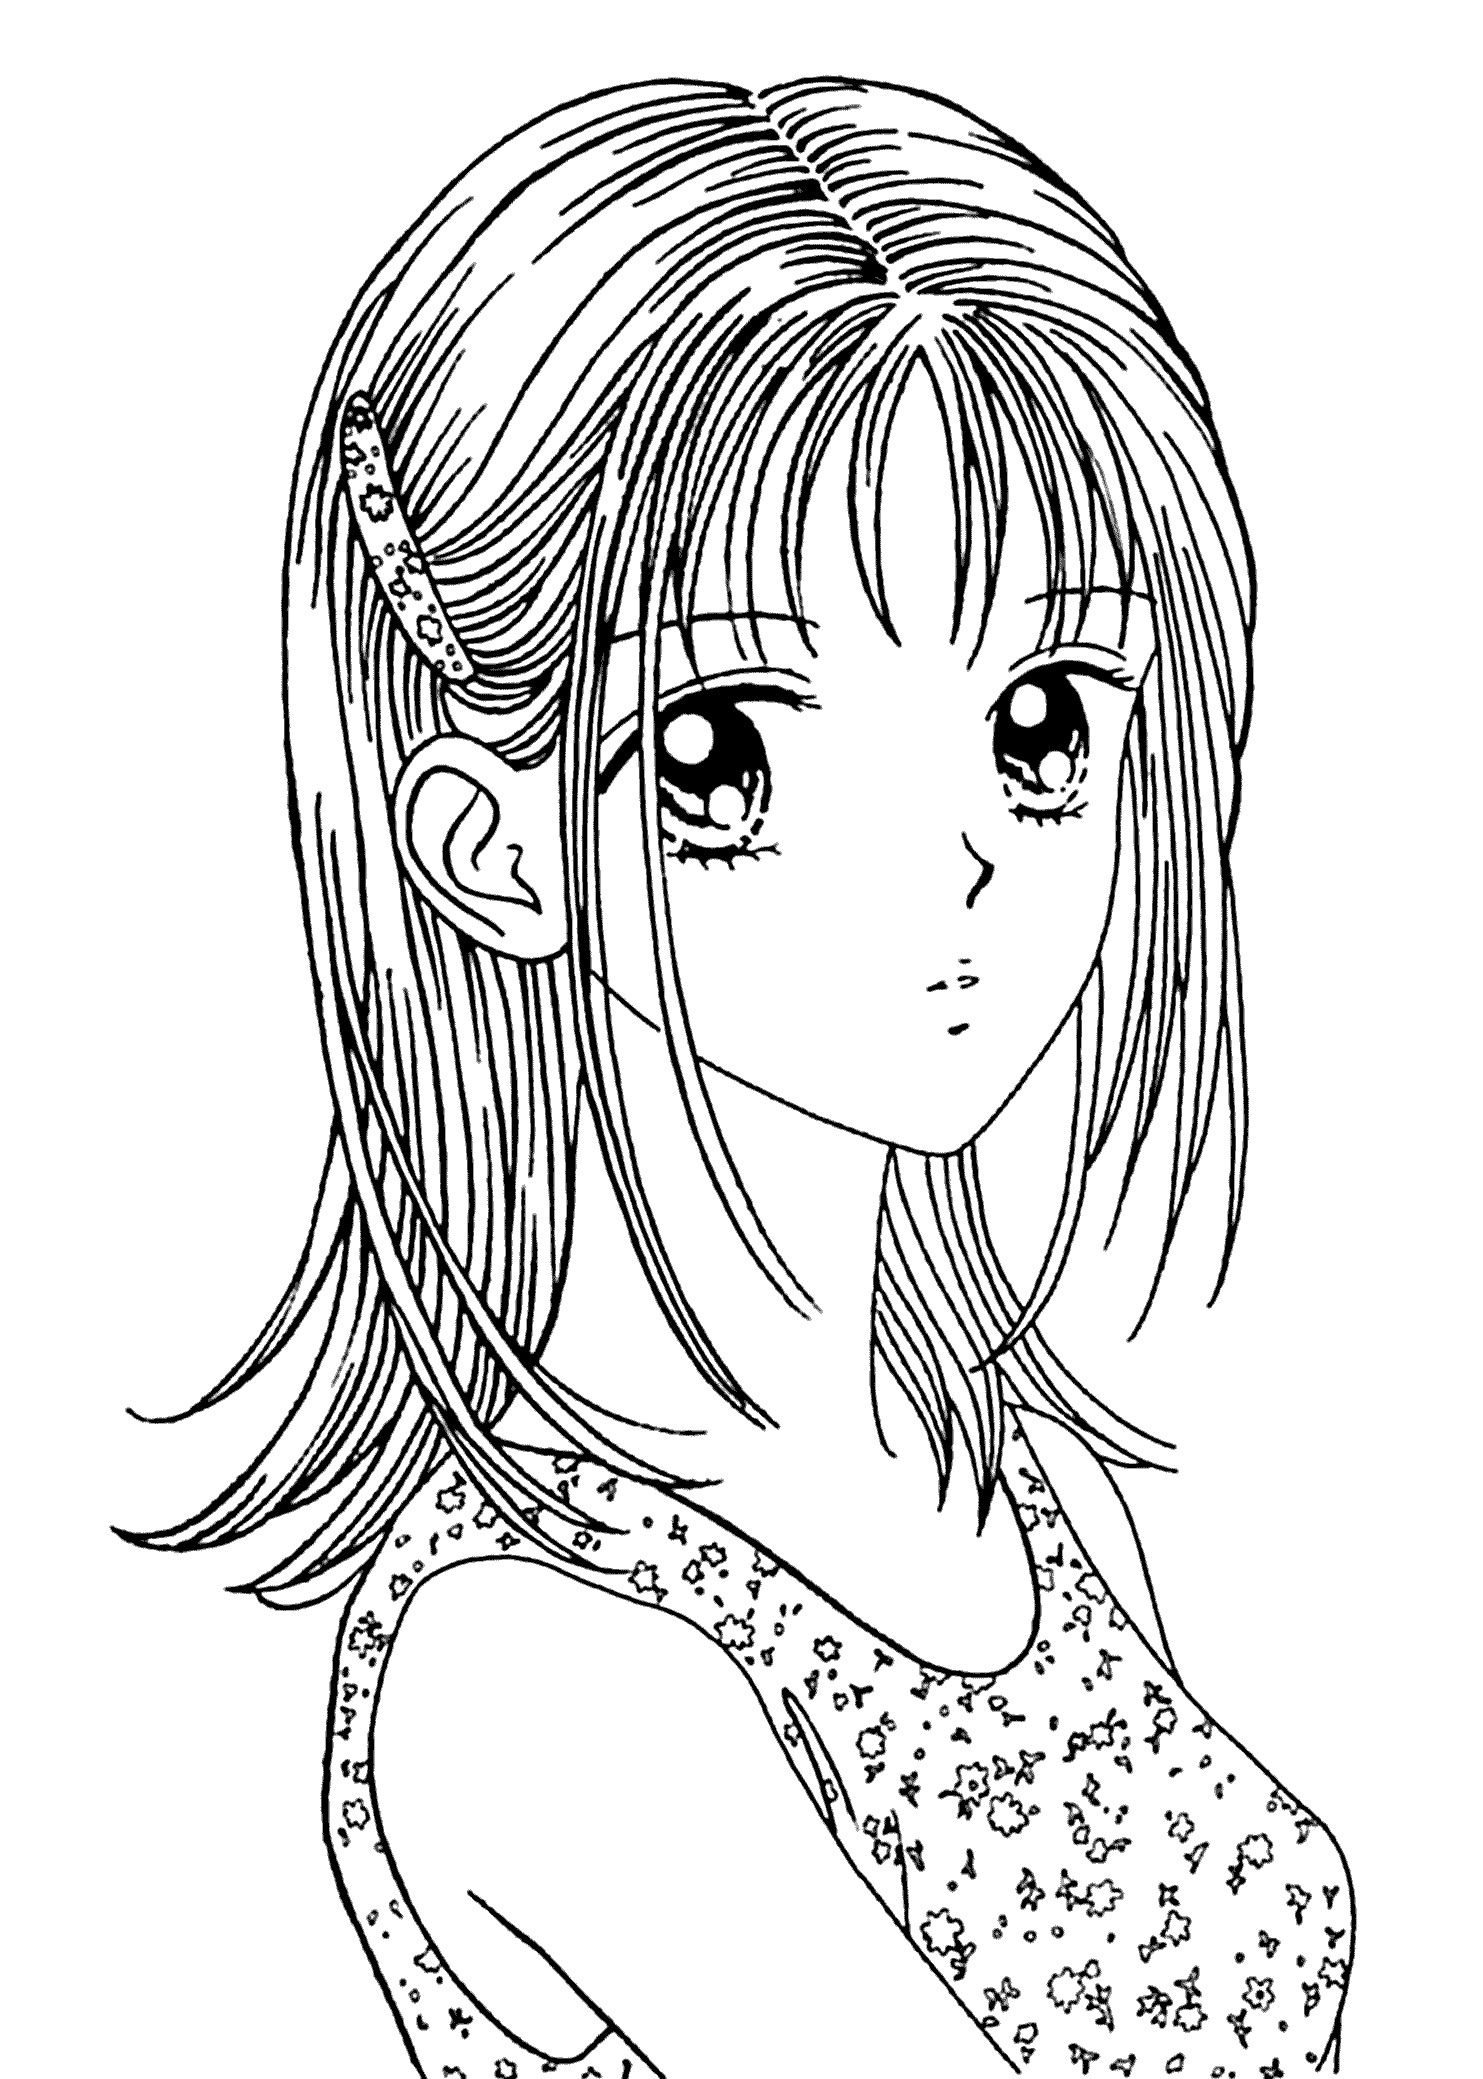 Manga Coloring Pages For Kids
 Marmalade boy anime coloring pages for kids printable